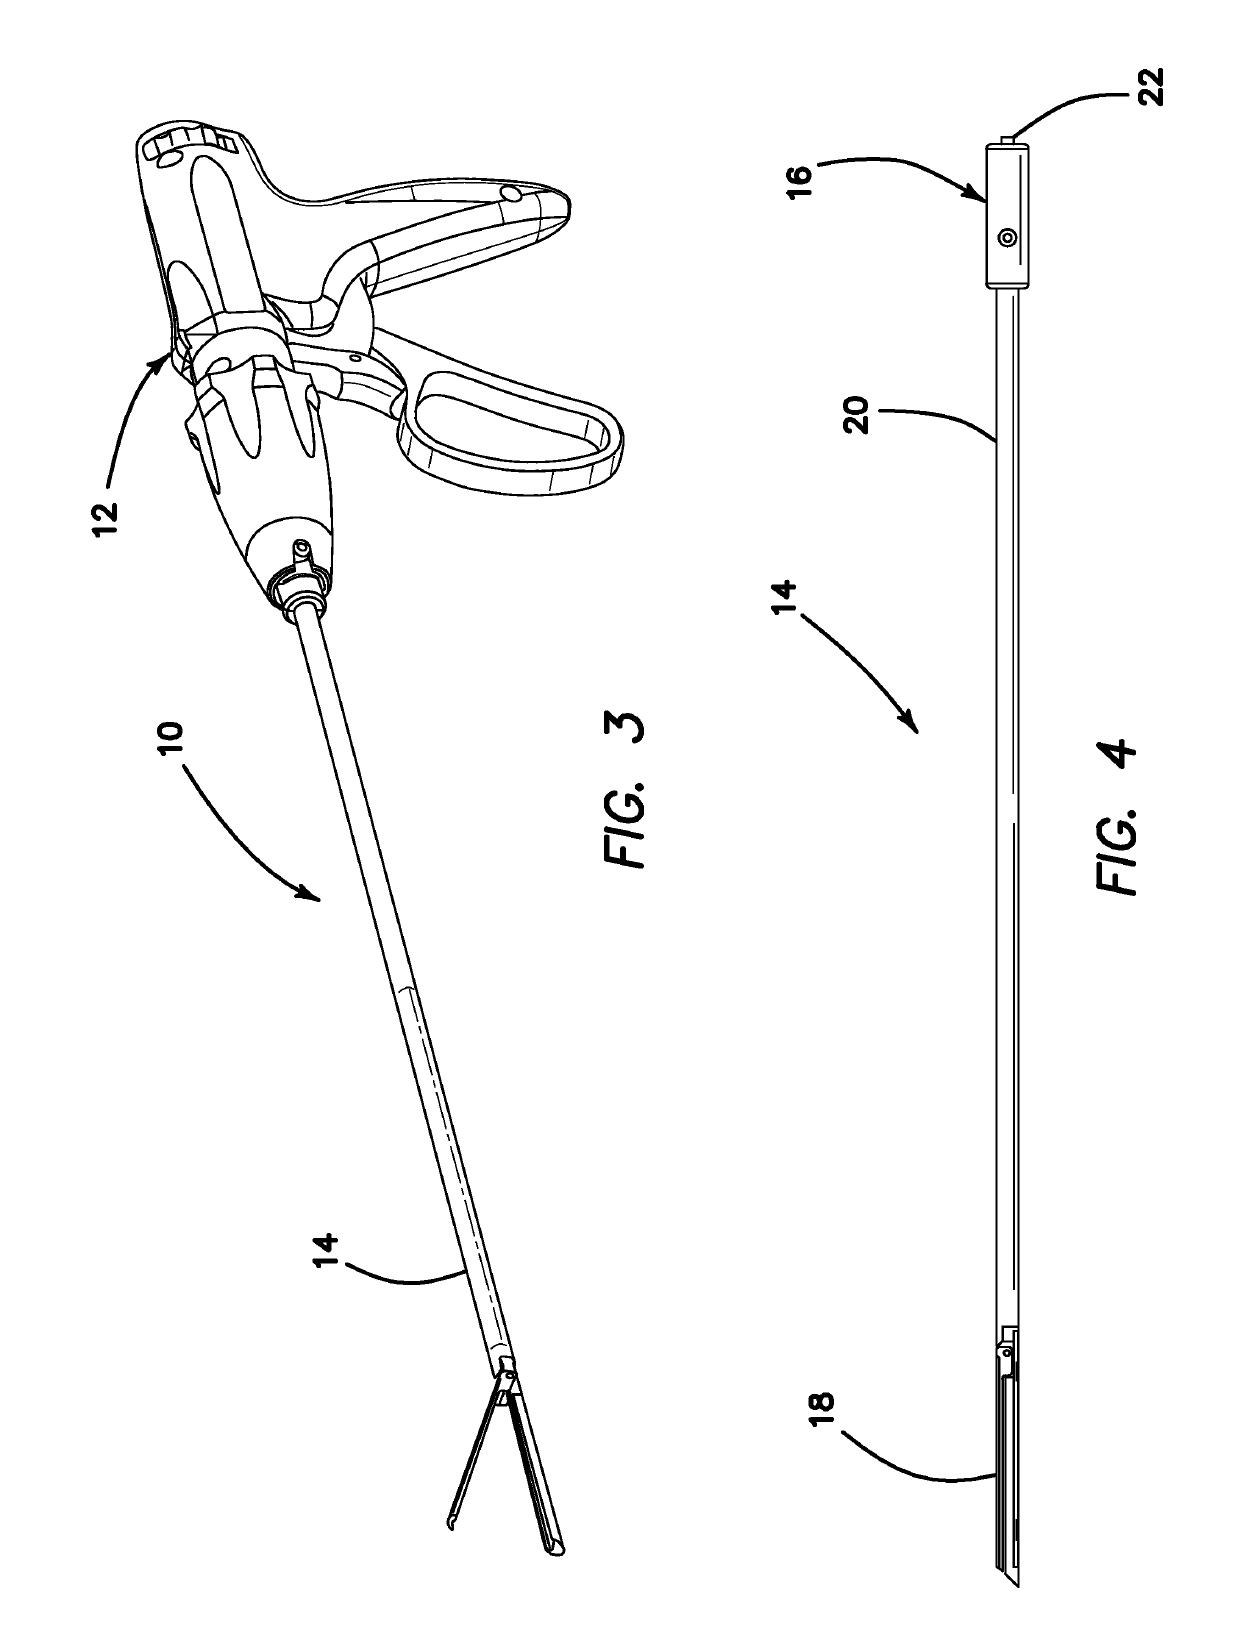 Surgical stapler with circumferential firing